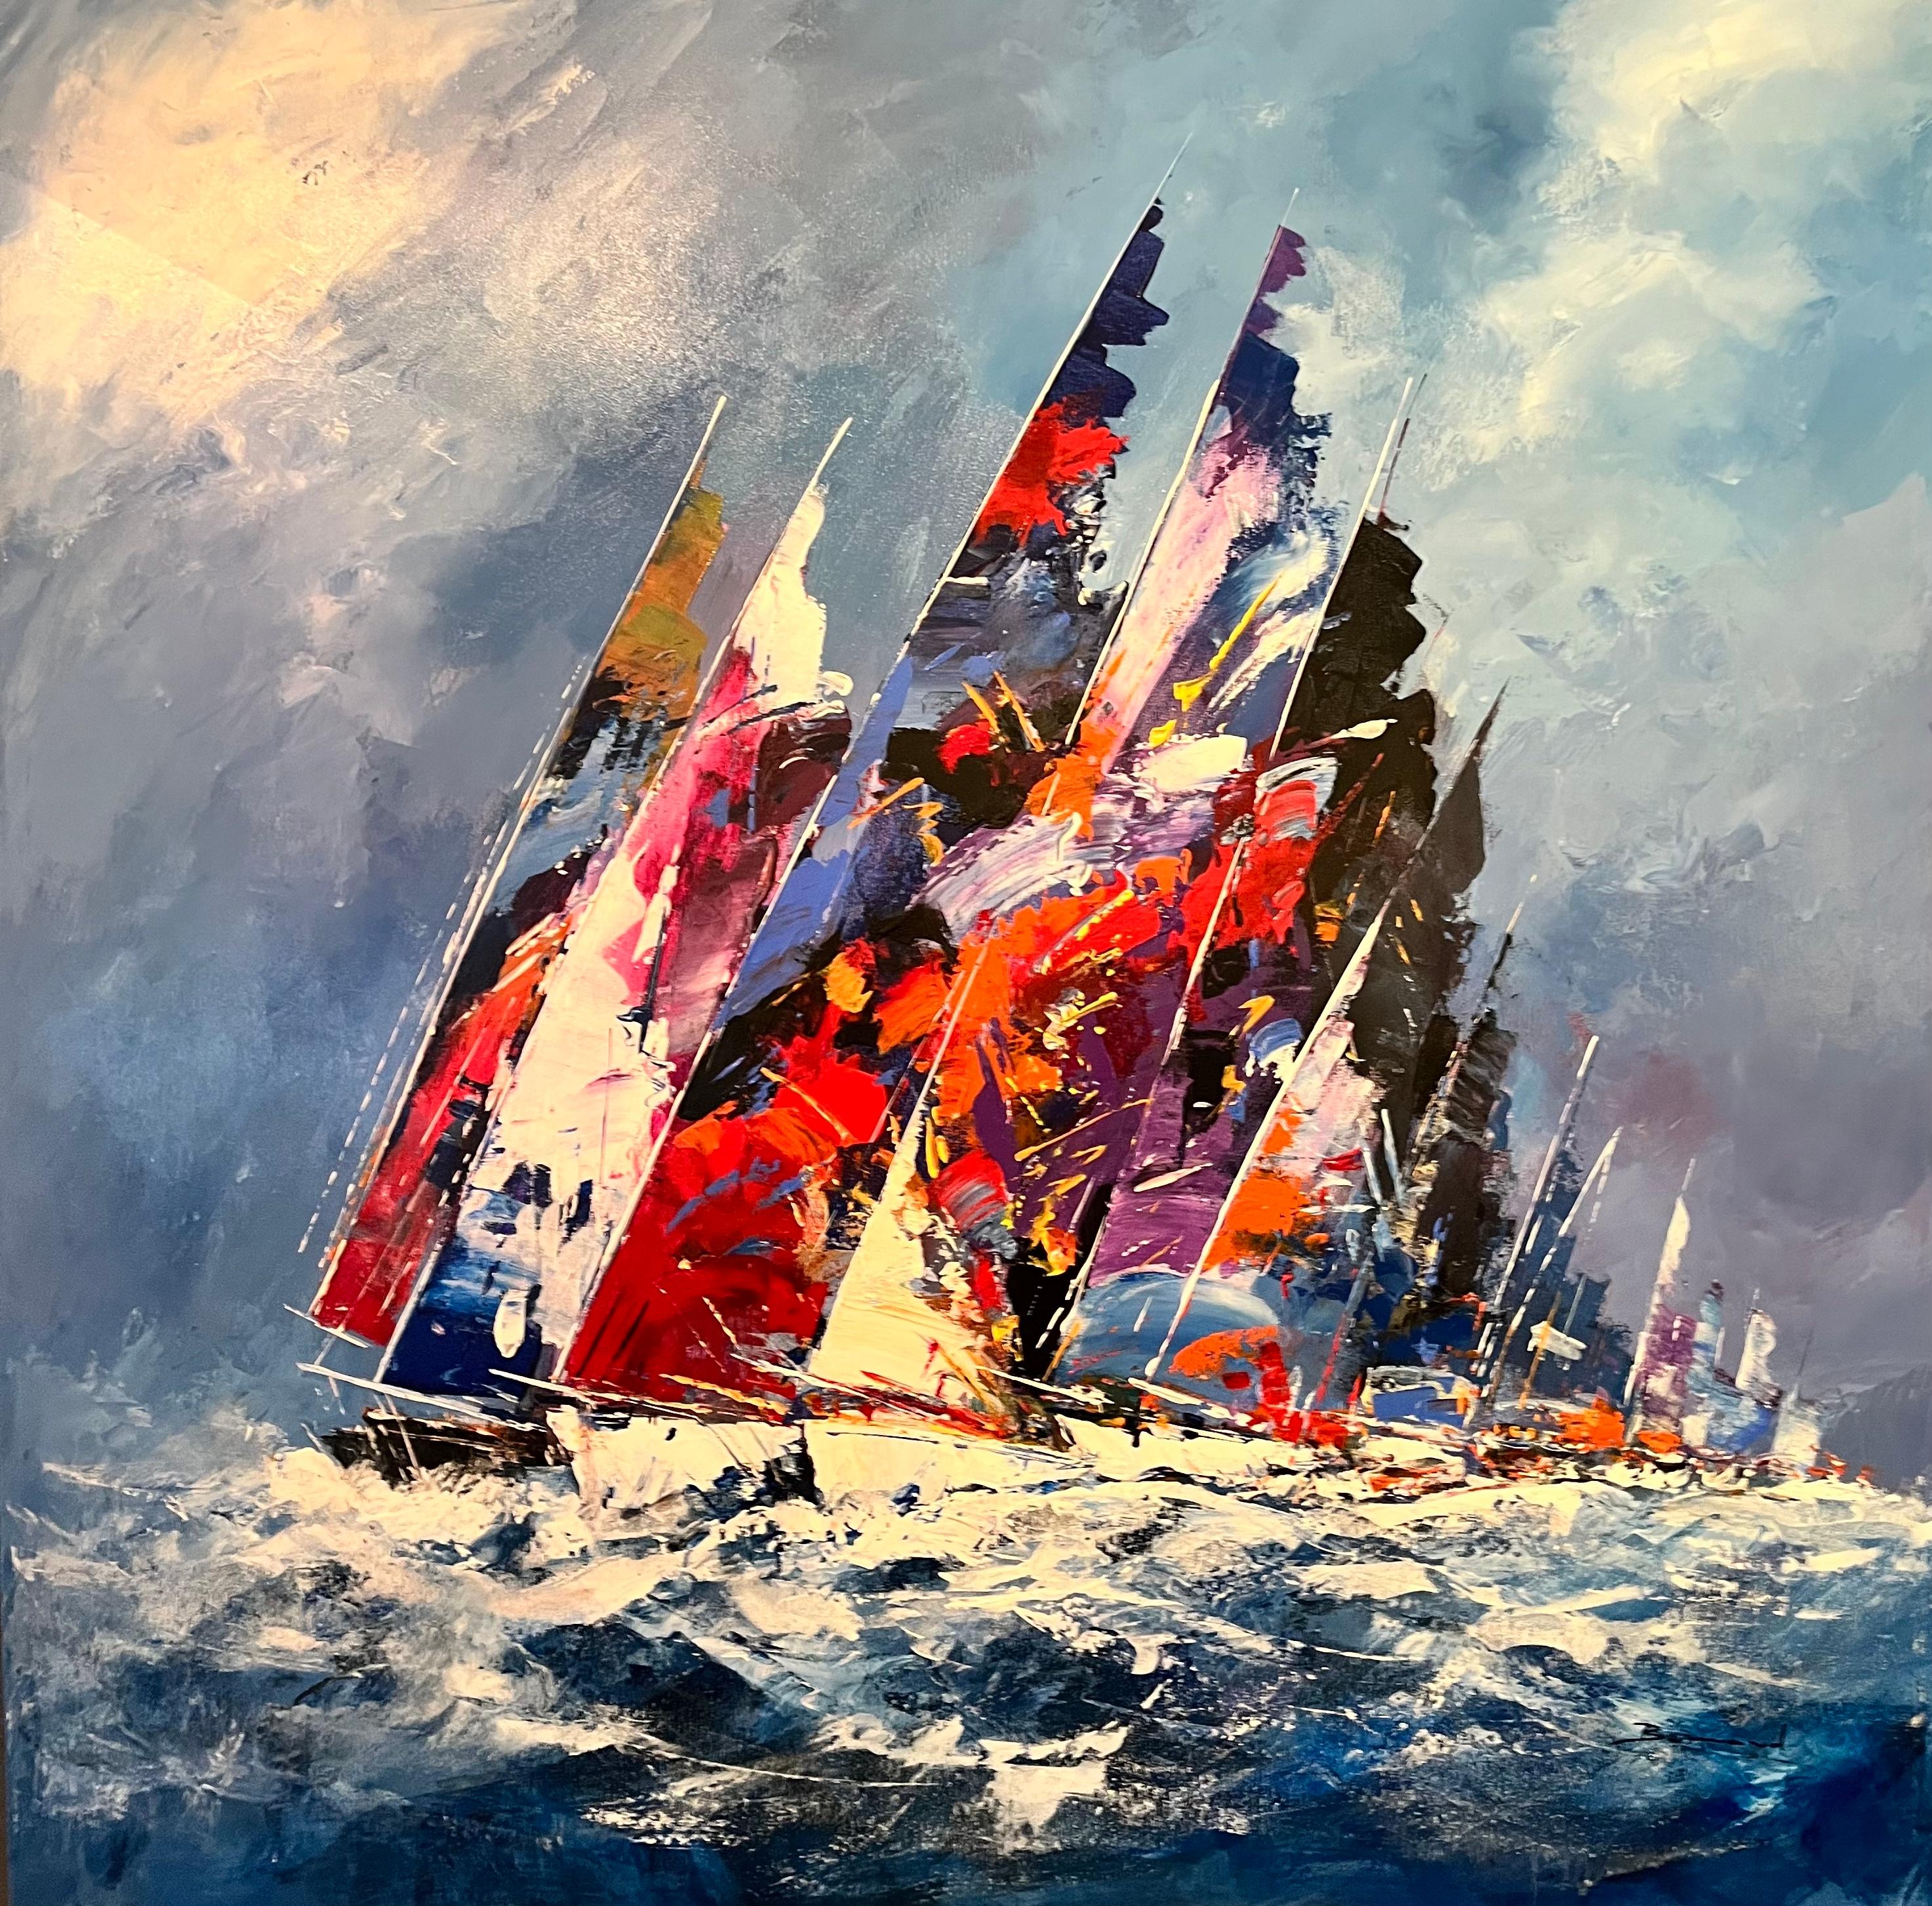 Bernard Abstract Painting - 'Moody Seas' Contemporary Painting of Colourful sail boats on water, blue, red